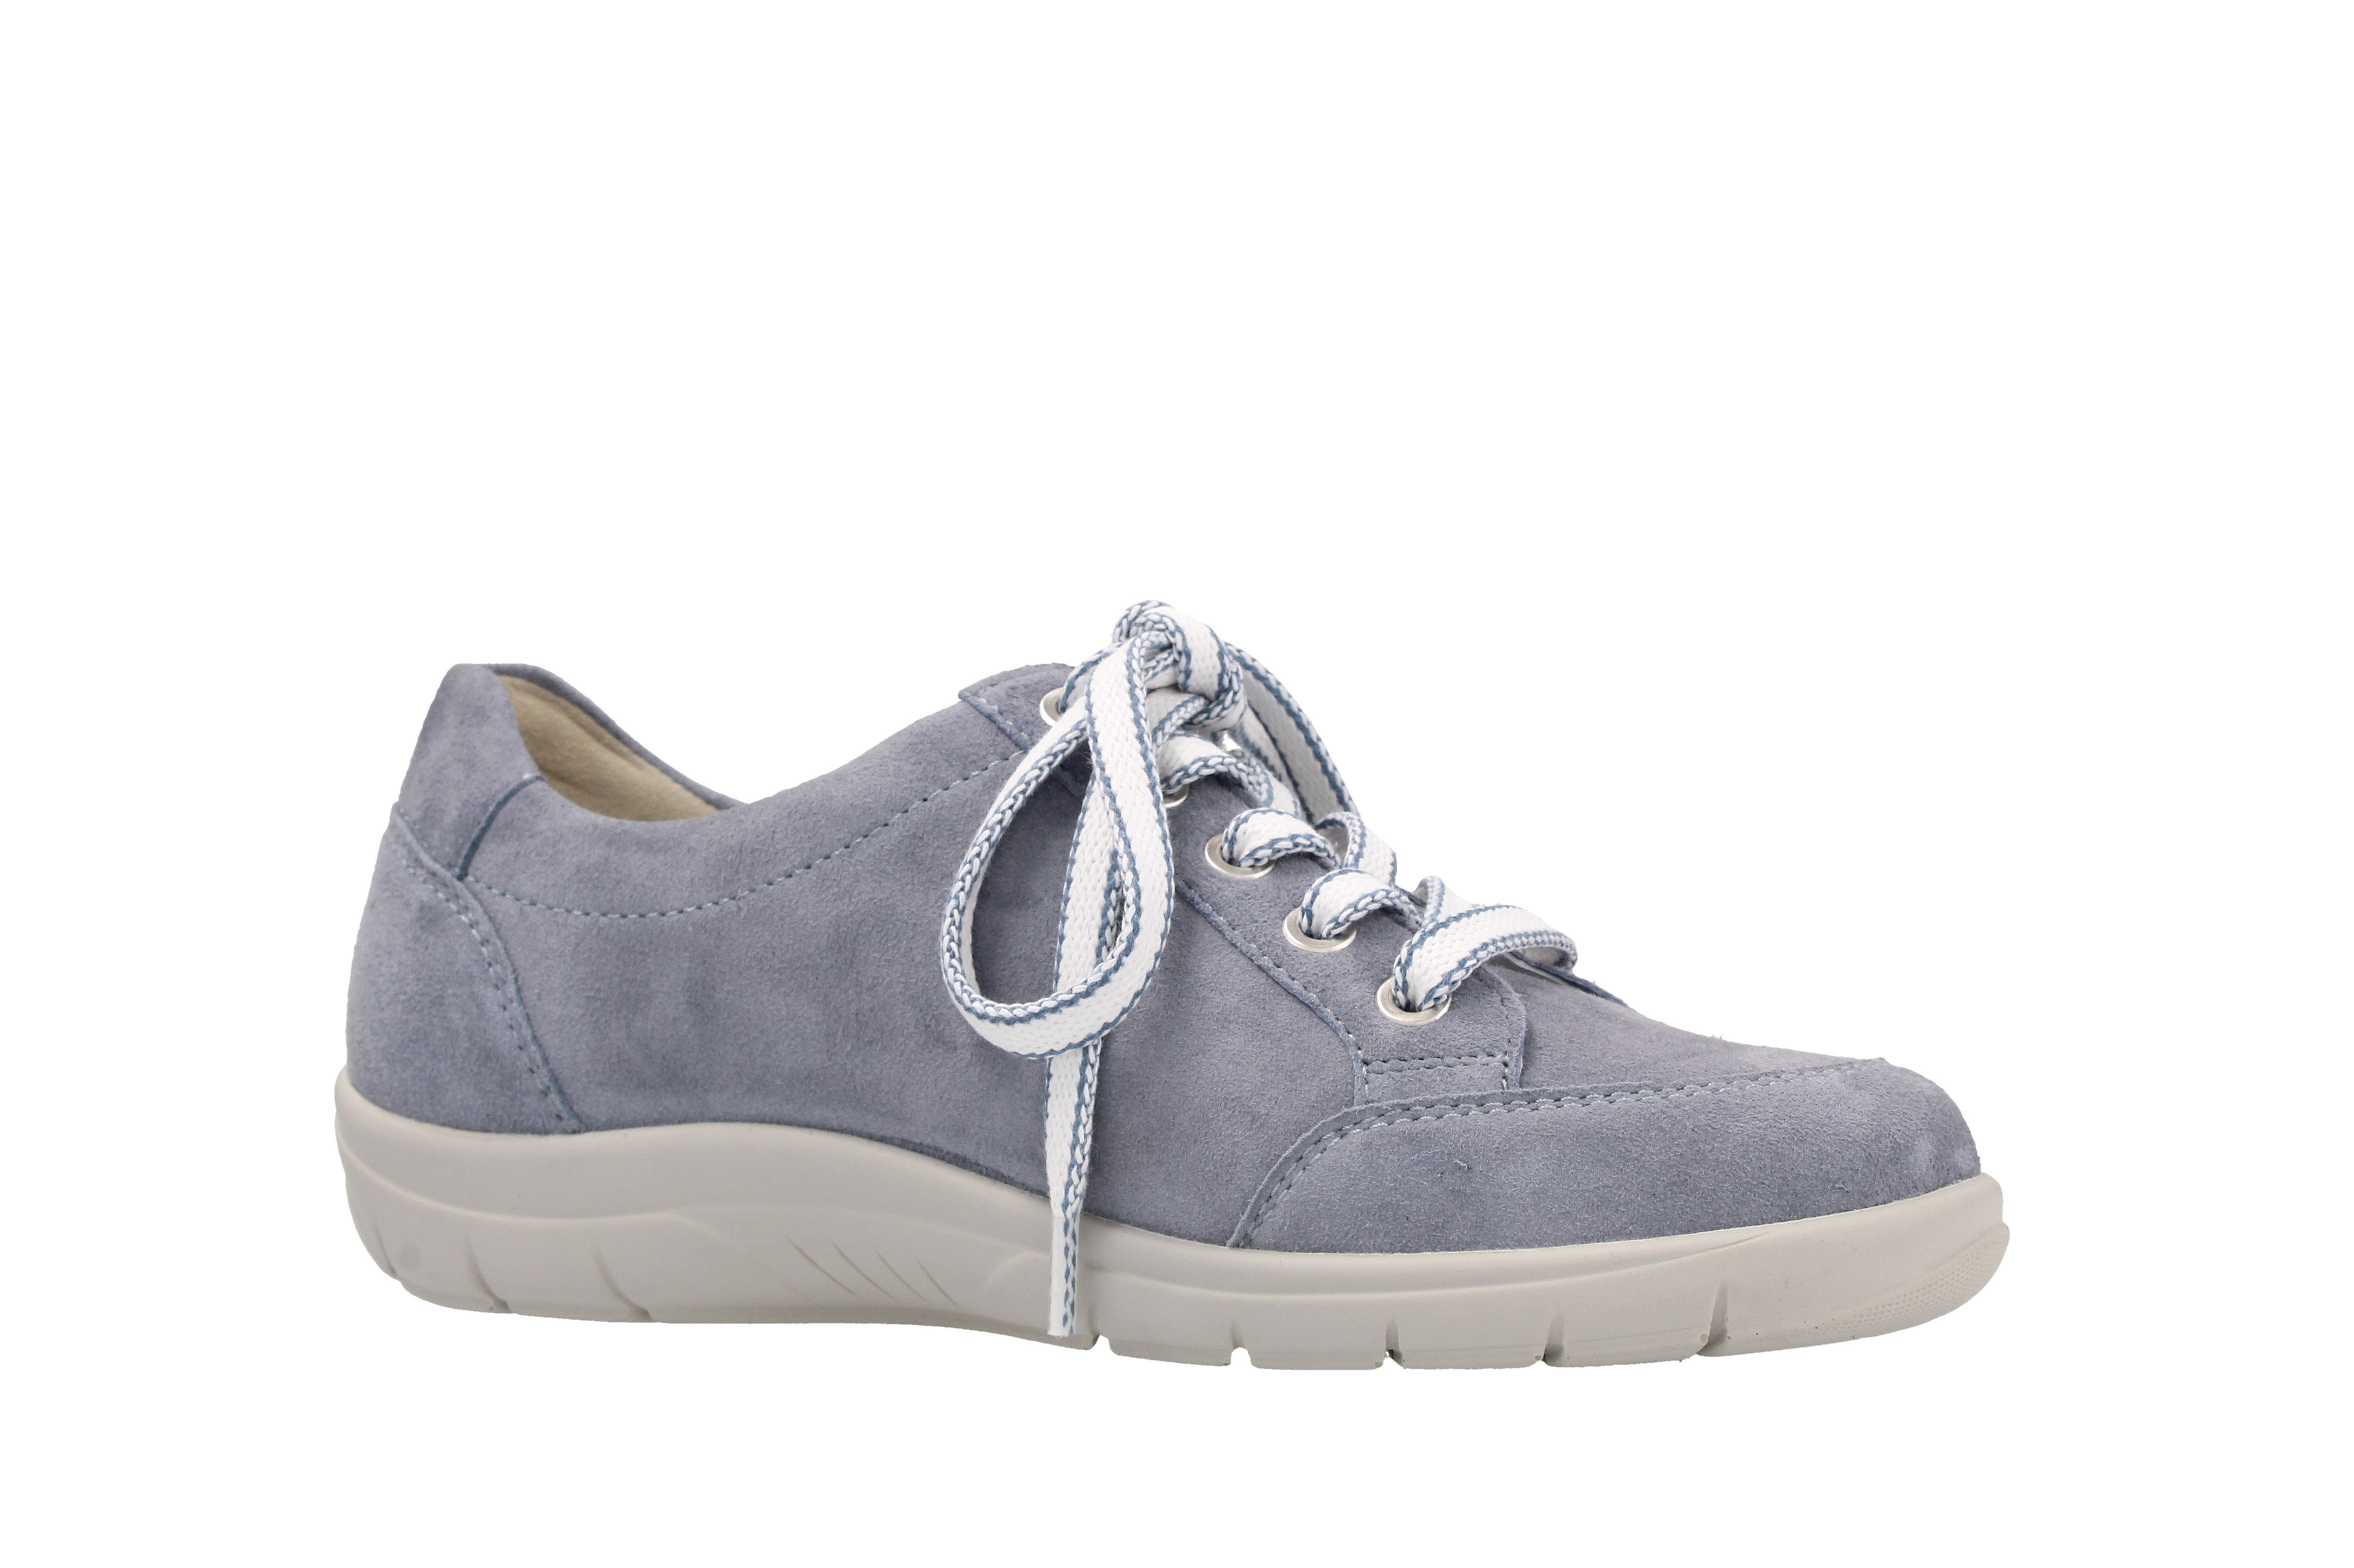 Michelle - Light blue suede leather